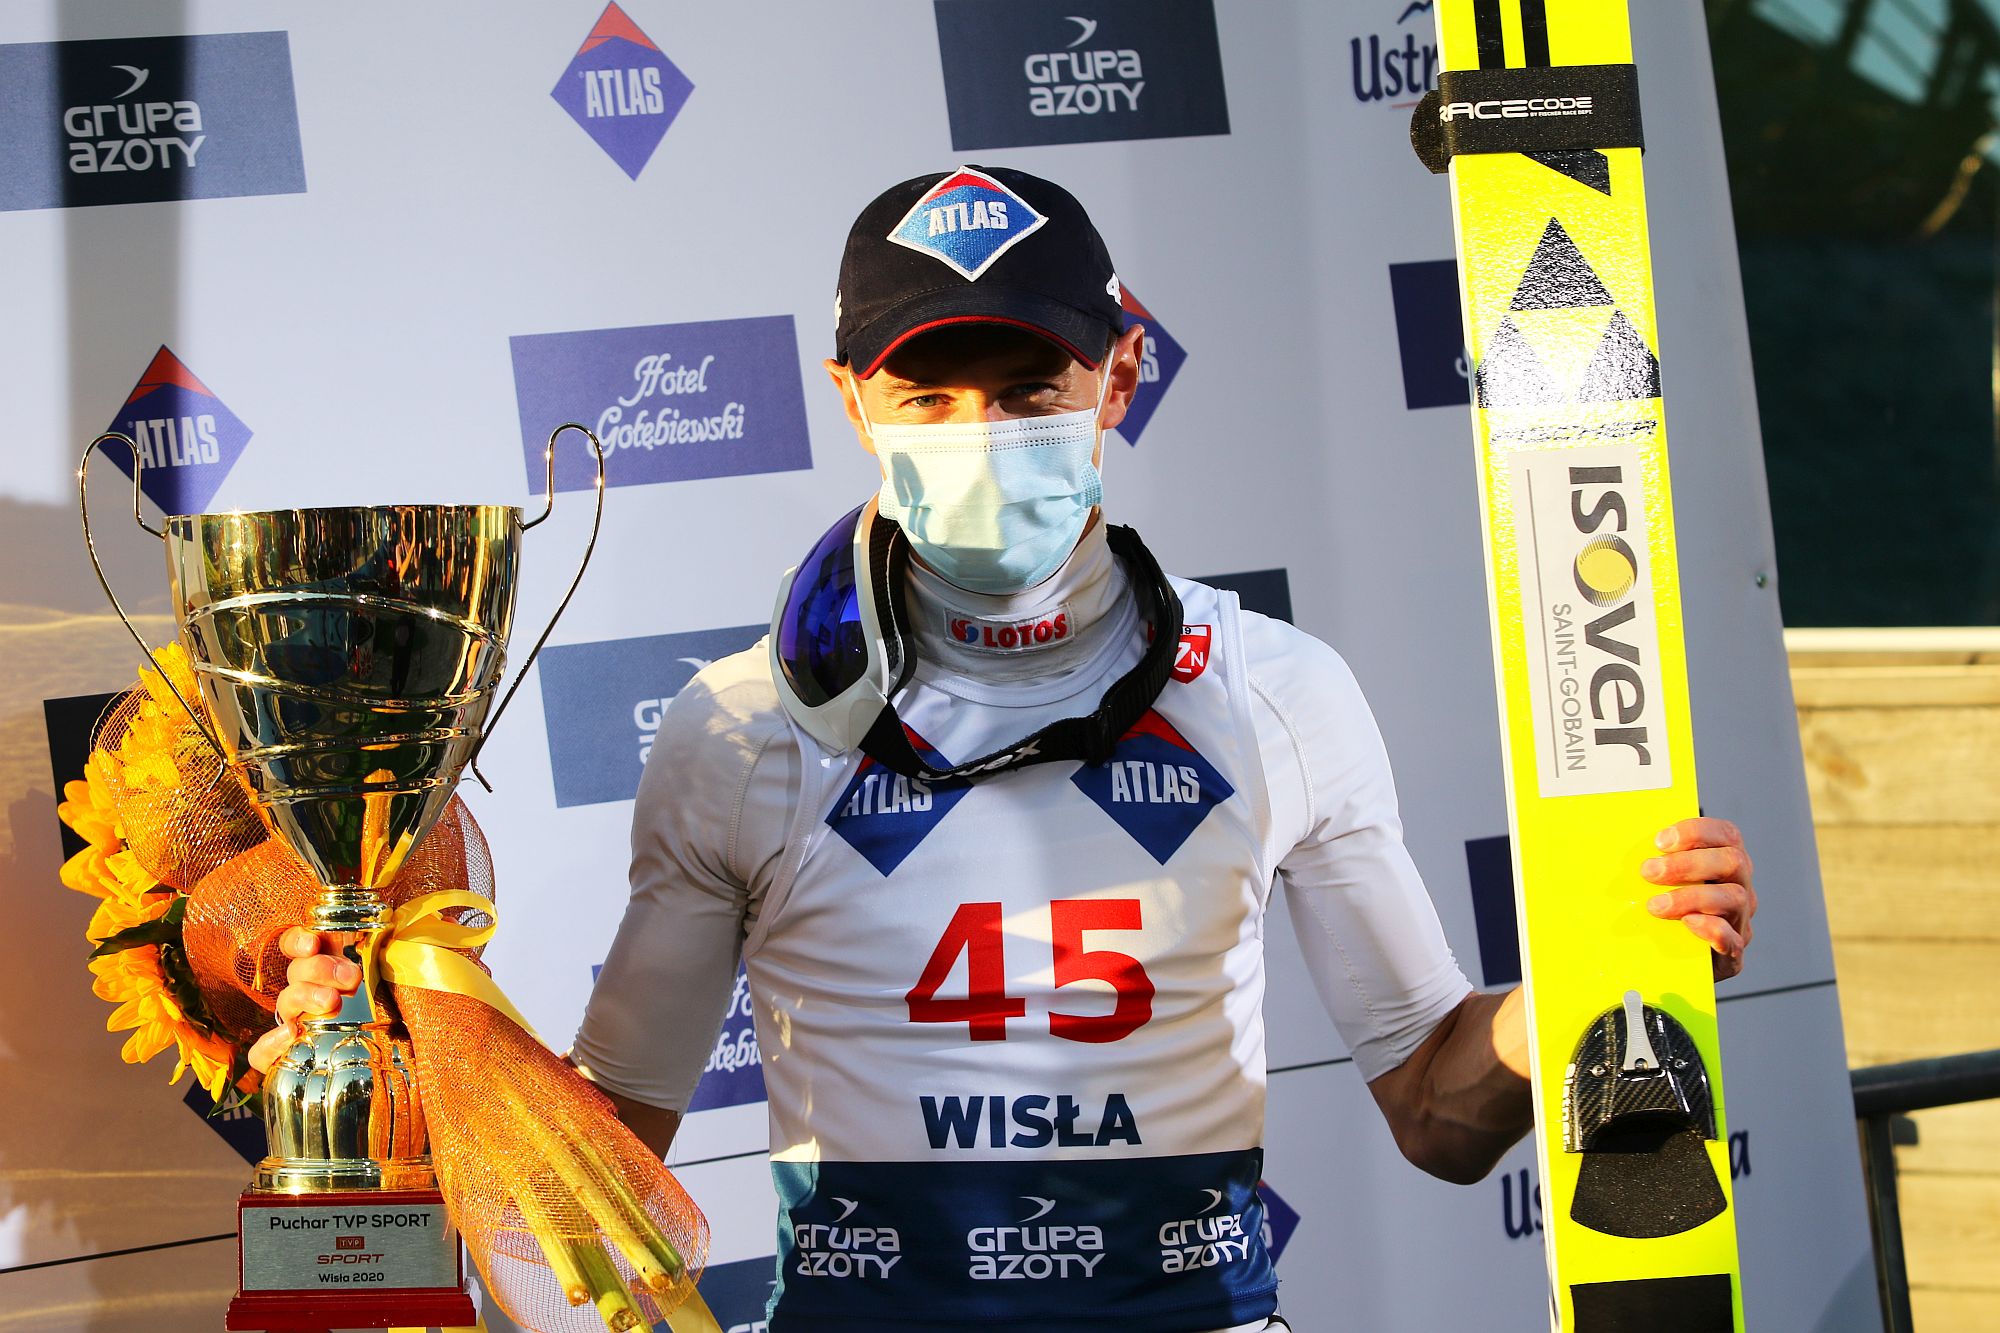 You are currently viewing Kamil Stoch z Pucharem TVP Sport, Dawid Kubacki drugi!